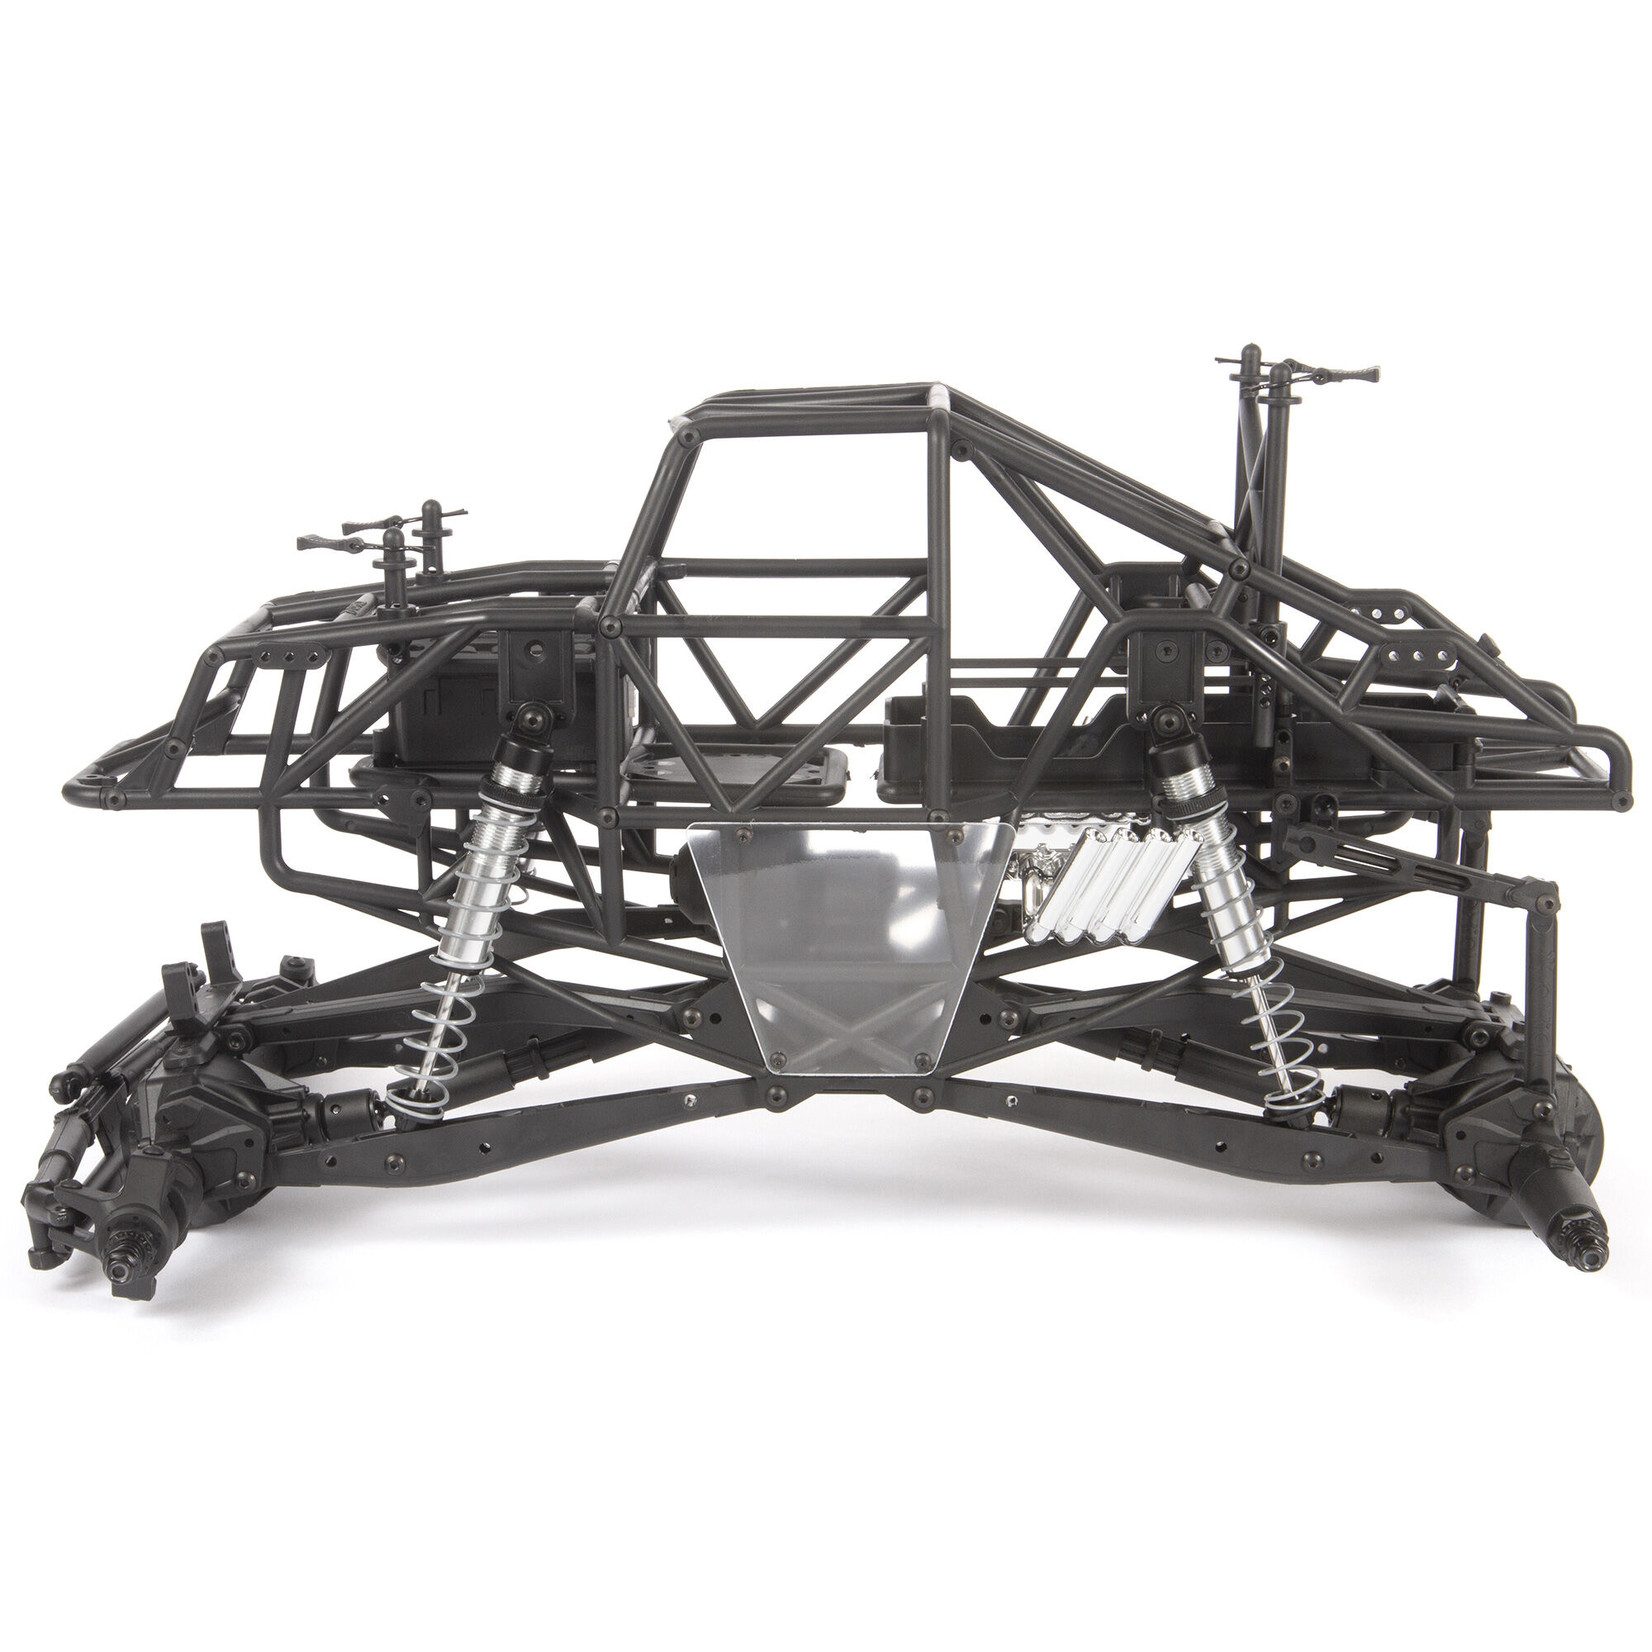 Axial 1/10 SMT10 4WD Monster Truck Raw Builders Kit